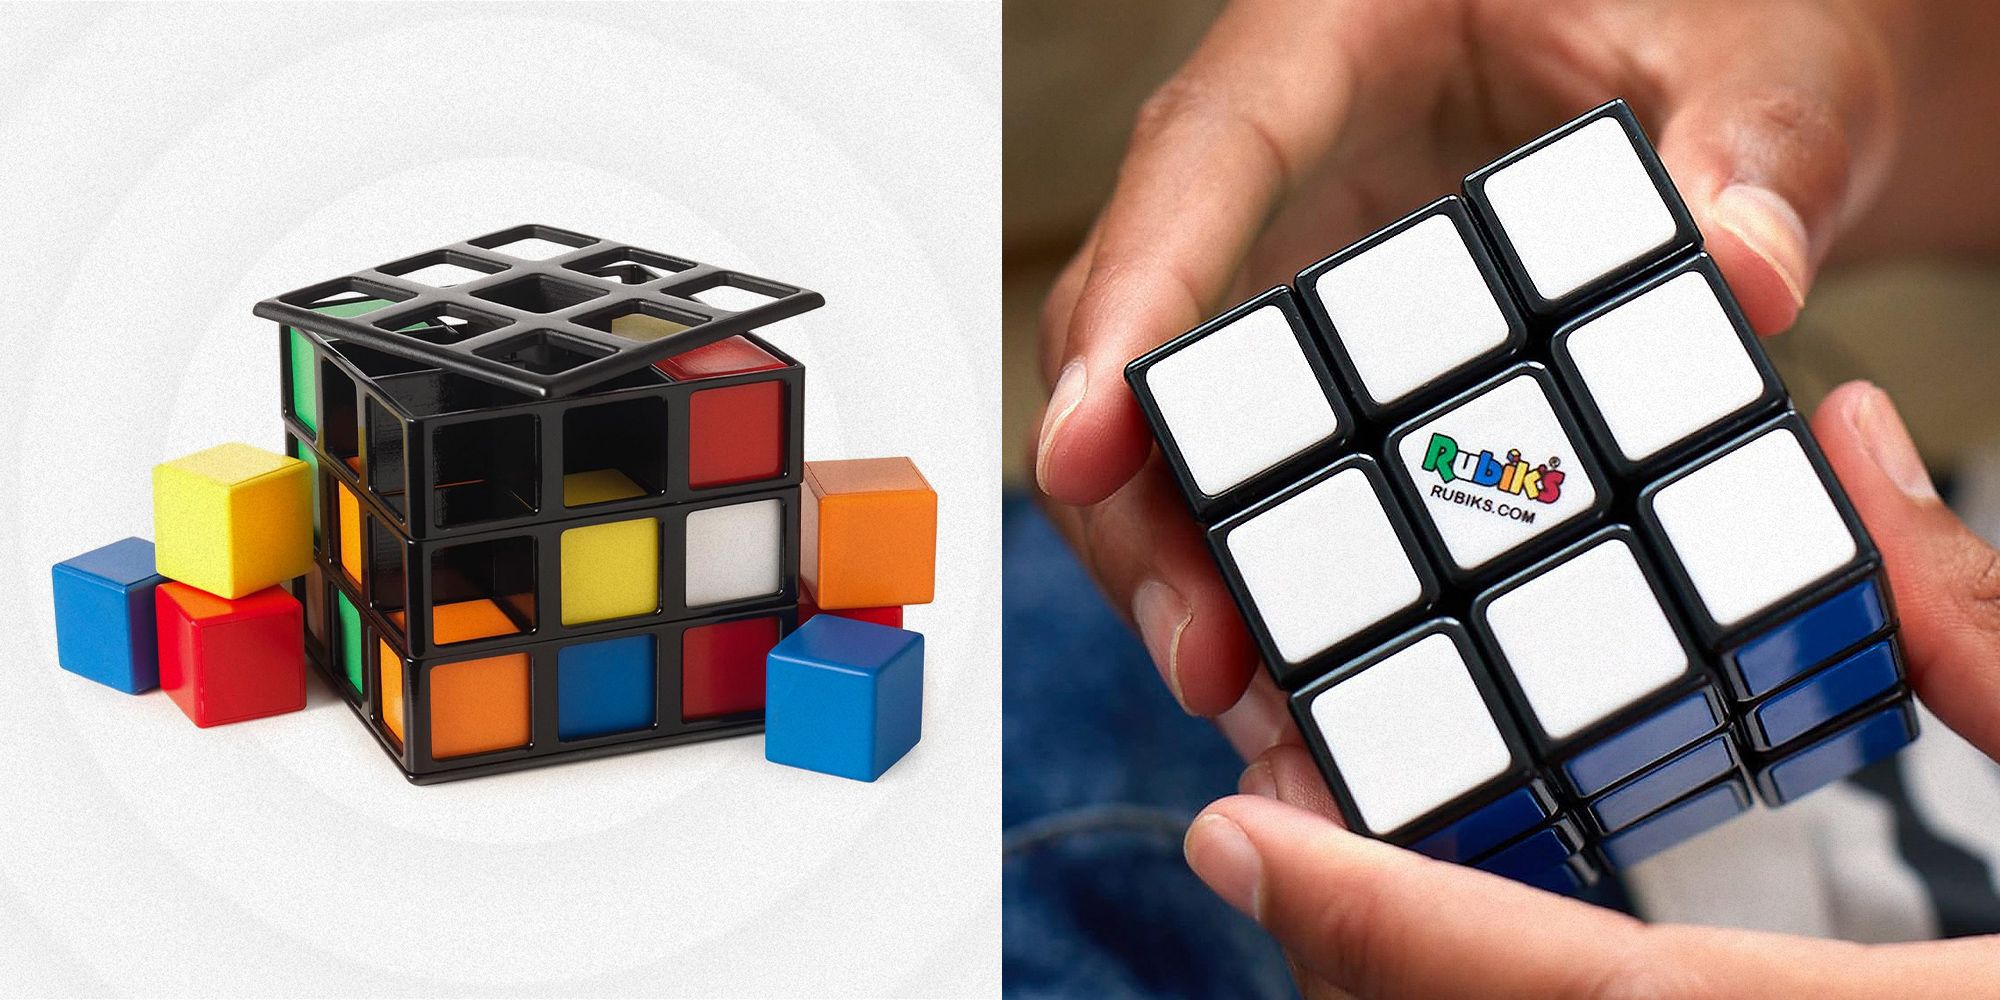 <p>Some toys never go out of fashion. Celebrating its 50th anniversary this year, Rubik’s continues to be the most popular puzzle cube brand in the world, with <a href="https://go.redirectingat.com?id=74968X1553576&url=https%3A%2F%2Ffinance.yahoo.com%2Fnews%2Frubik-cube-still-selling-millions-093000578.html&sref=https%3A%2F%2Fwww.popularmechanics.com%2Fculture%2Fg60190449%2Fbest-rubiks-cubes%2F">around 500 million</a> sold, according to <em>Yahoo Finance</em>. While the classic Rubik’s cube may still be its biggest hit, the company has expanded significantly over the last 50 years, offering other <a href="https://www.popularmechanics.com/culture/gaming/g32156380/hard-puzzles/">puzzles</a> and board games as well. </p><p>With an ever expanding number of cube sizes, the infusion of new games and puzzles in the spirit of the original toy, and improvements made to old classics, there are more Rubik’s products than you can keep track of. Don’t get lost in the colors—for birthdays, game nights, and rainy Saturdays alike, check out our list of the best Rubik’s Cubes and games that the company has to offer. </p><h2 class="body-h2">The Best Rubik’s Cubes</h2><ul><li><strong>The Standard Cube:</strong> <a href="https://www.amazon.com/dp/B092W7D64G?tag=syndication-20&ascsubtag=%5Bartid%7C10060.g.60190449%5Bsrc%7Cmsn-us">The Original 3x3 Rubik’s Cube</a></li><li><strong>Best Table Game:</strong> <a href="https://www.amazon.com/dp/B0CCW4KDHY?tag=syndication-20&ascsubtag=%5Bartid%7C10060.g.60190449%5Bsrc%7Cmsn-us">Rubik’s Gridlock Game</a></li><li><strong>Best Non-Cube Puzzle:</strong> <a href="https://www.amazon.com/Rubiks-Pyramid-Color-Matching-Triangular-Challenging/dp/B09FXCD3M9?tag=syndication-20&ascsubtag=%5Bartid%7C10060.g.60190449%5Bsrc%7Cmsn-us">Rubik’s Pyramid</a></li><li><strong>Best Multiplayer Game:</strong> <a href="https://www.amazon.com/Rubiks-Fast-Paced-Strategy-Challenging-Puzzle-Solving/dp/B09GGXVX1P?th=1&tag=syndication-20&ascsubtag=%5Bartid%7C10060.g.60190449%5Bsrc%7Cmsn-us">Rubik’s Cage Strategy Game</a></li><li><strong>Best Challenge:</strong> <a href="https://www.amazon.com/Professor-Professors-Colour-Matching-Complex-Problem-Solving/dp/B092W9G6B7/?th=1&tag=syndication-20&ascsubtag=%5Bartid%7C10060.g.60190449%5Bsrc%7Cmsn-us">Rubik’s Professor 5x5 Cube</a></li></ul><h2 class="body-h2">What to Consider</h2><h3 class="body-h3">What Does Rubik’s Make Besides Cubes?</h3><p>Rubik’s has combination puzzles in different sizes and shapes, including pyramids, 5x5 cubes, and even twisting puzzles that you rearrange into geometric shapes. Beyond the classic cubes, Rubik’s now has several games that play on the color combining that put the brand on the map. These include head-to-head color match races, grid-style puzzles, and even a three-dimensional version of tic-tac-toe.</p><p>Rubik’s now offers a full range of puzzles, cubes, and brain teasers, which may scratch the same sort of itch as the original. That said, if you’re a speed cuber or looking to get into competitive cubing, we don’t recommend a classic Rubik’s Cube. </p><p>While the company may have invented the puzzle, even the smoothest Rubik’s cubes don’t have the motion and movement capabilities to handle top-level performance in competitive speed cubing, where players compete to solve puzzles like the Rubik’s Cube. Despite being the original cube, Rubik’s isn’t competitive cubers’ preferred brand—other options, like the <a href="https://www.amazon.com/dp/B08Q7QMHZB/?th=1&tag=syndication-20&ascsubtag=%5Bartid%7C10060.g.60190449%5Bsrc%7Cmsn-us">Gan 11 M Pro from CuberSpeed</a>, have smoother motions and perks like internal magnets to speed up solve times.</p><h3 class="body-h3">Number of Players</h3><p>The traditional Rubik’s Cube is made for solo use. Many of the newer Rubik’s games accommodate two to four players at a time. These games are typically head-to-head and are either speed- or strategy-based. If you’re looking for something solo, opt for classic cubes or <a href="https://www.popularmechanics.com/culture/g46648044/3d-brain-teaser-puzzles/">brain teaser</a> puzzles with one-player challenges.</p><h3 class="body-h3">Level of Difficulty</h3><p class="body-text">All Rubik’s games and puzzles have a suggested age printed on the box. While they are certainly not gospel, buying a game above the age range of the user might run the risk of them struggling to understand or enjoy it. That said, with many of the Rubik’s items meant to be tinkered with, pored over, and figured out over a long period of time, don’t shy away from buying them as a gift for someone who loves to problem solve, regardless of age.</p><p><a class="body-btn-link" href="https://www.popularmechanics.com/science/math/a30244043/solve-rubiks-cube/">The Amazing Math Inside the Rubik’s Cube</a></p><h2 class="body-h2">How We Selected</h2><p class="body-text">My goal was to include Rubik’s products that hold true to the original spirit of that first cube while incorporating new social and competitive elements (for replay value and a bit of extra fun). I started with several categories to fill: the best games to play with friends or family, the best that flip the original cube form factor on its head, and the toughest puzzles, to name a few. With those in mind, I began my search for the best Rubik’s puzzles by scouring the full list of games the brand makes prioritizing a good mix of play styles and creative takes on the classic. There are, of course, some classic choices that most people know and love already, too.</p><p>While the phrase “Rubik’s Cube” has become colloquially synonymous with any 3x3 or 5x5 combination puzzle, I stuck to official Rubik’s games. We went through all of the company’s offerings and selected items that offered the most variety of play and the most creative takes on the classic game. Here you’ll find Rubik’s products that show off the original spirit of the first cube while incorporating new social and competitive elements that add replay value and a bit of extra fun.</p>